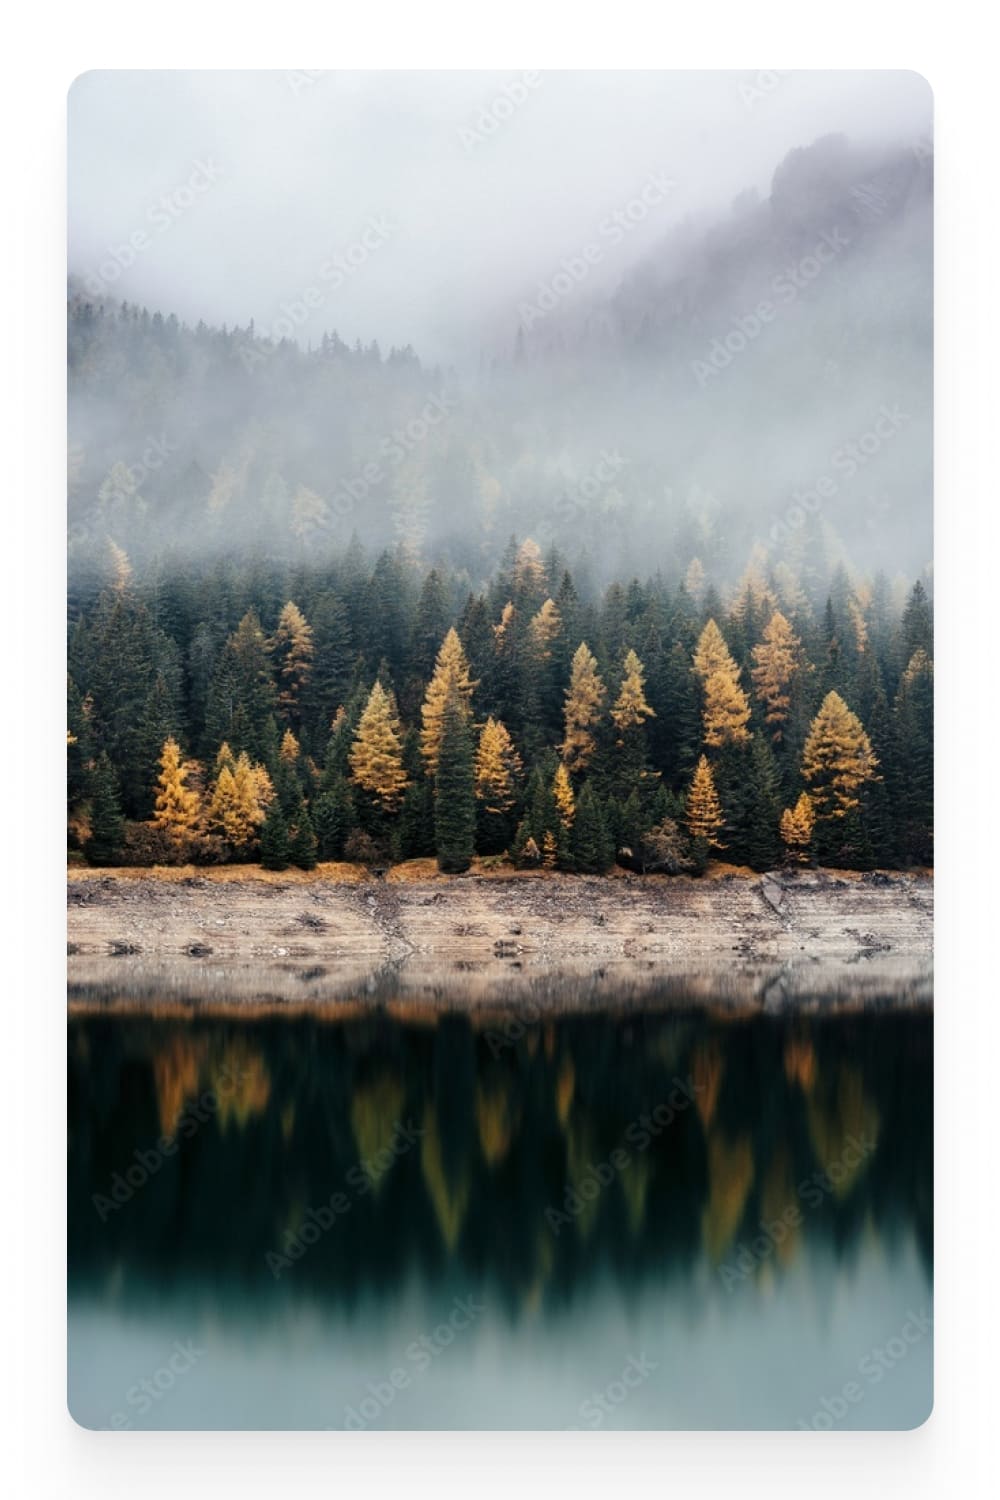 Photo of the lake, shore and colorful fir trees.